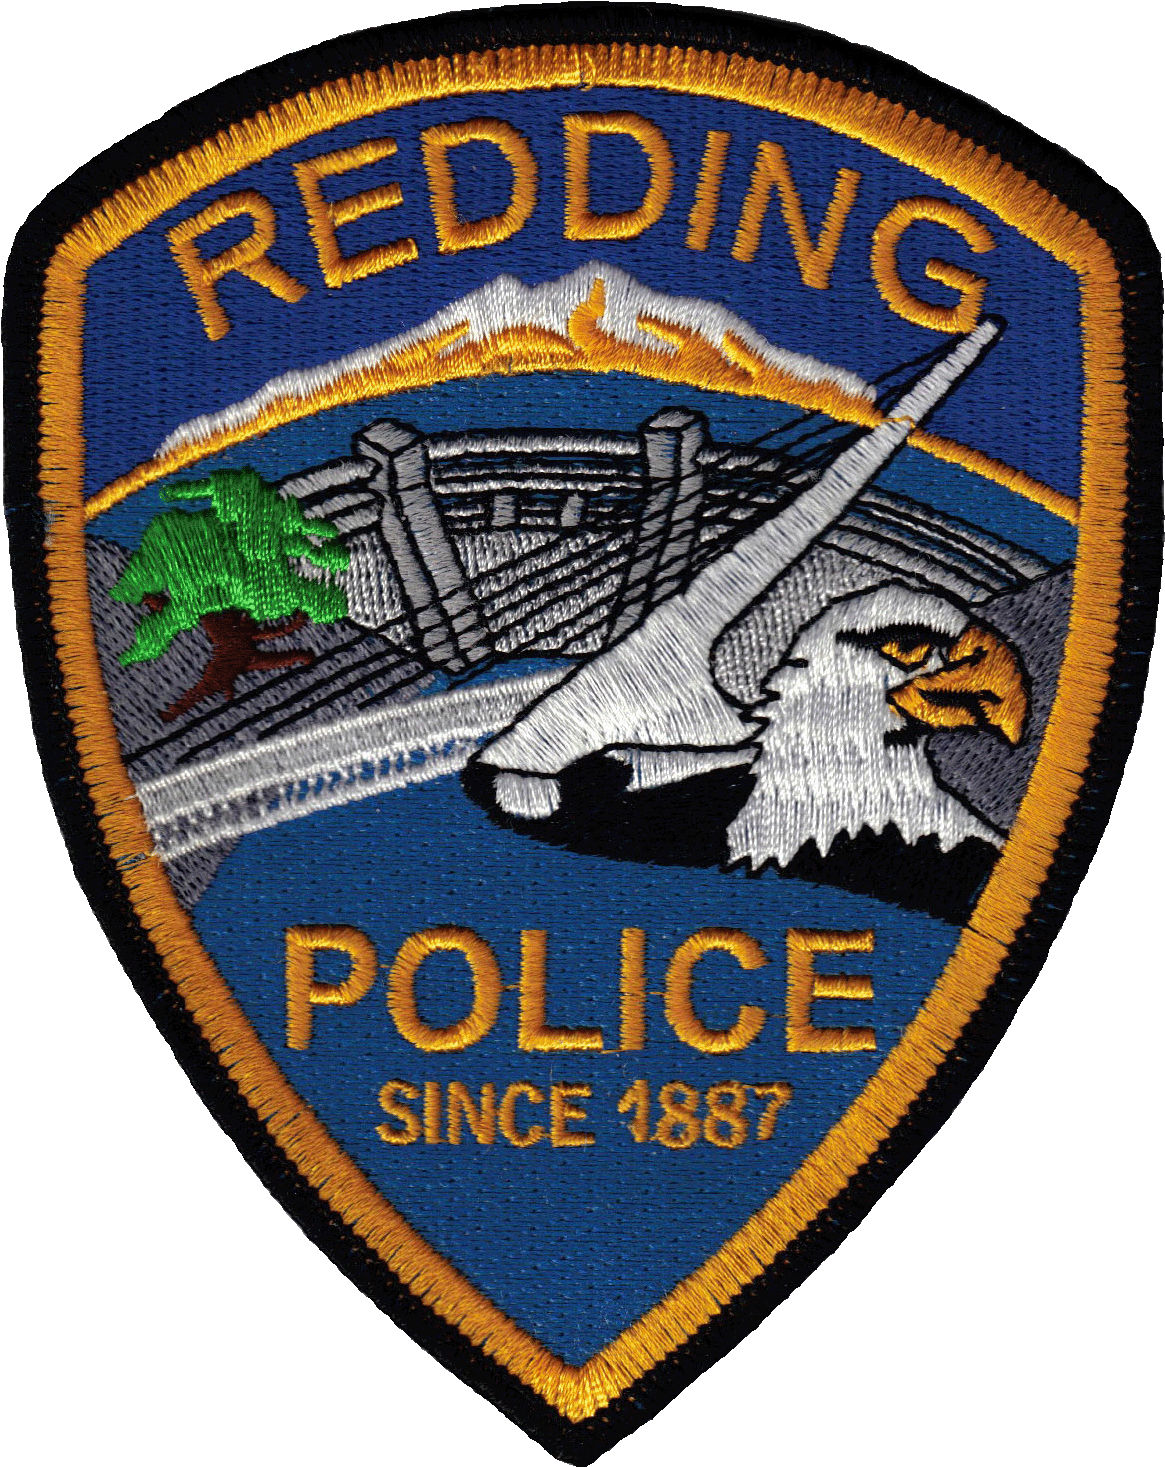 On 02/18/2014, At About - Redding Police Department Patch (1254x1566)